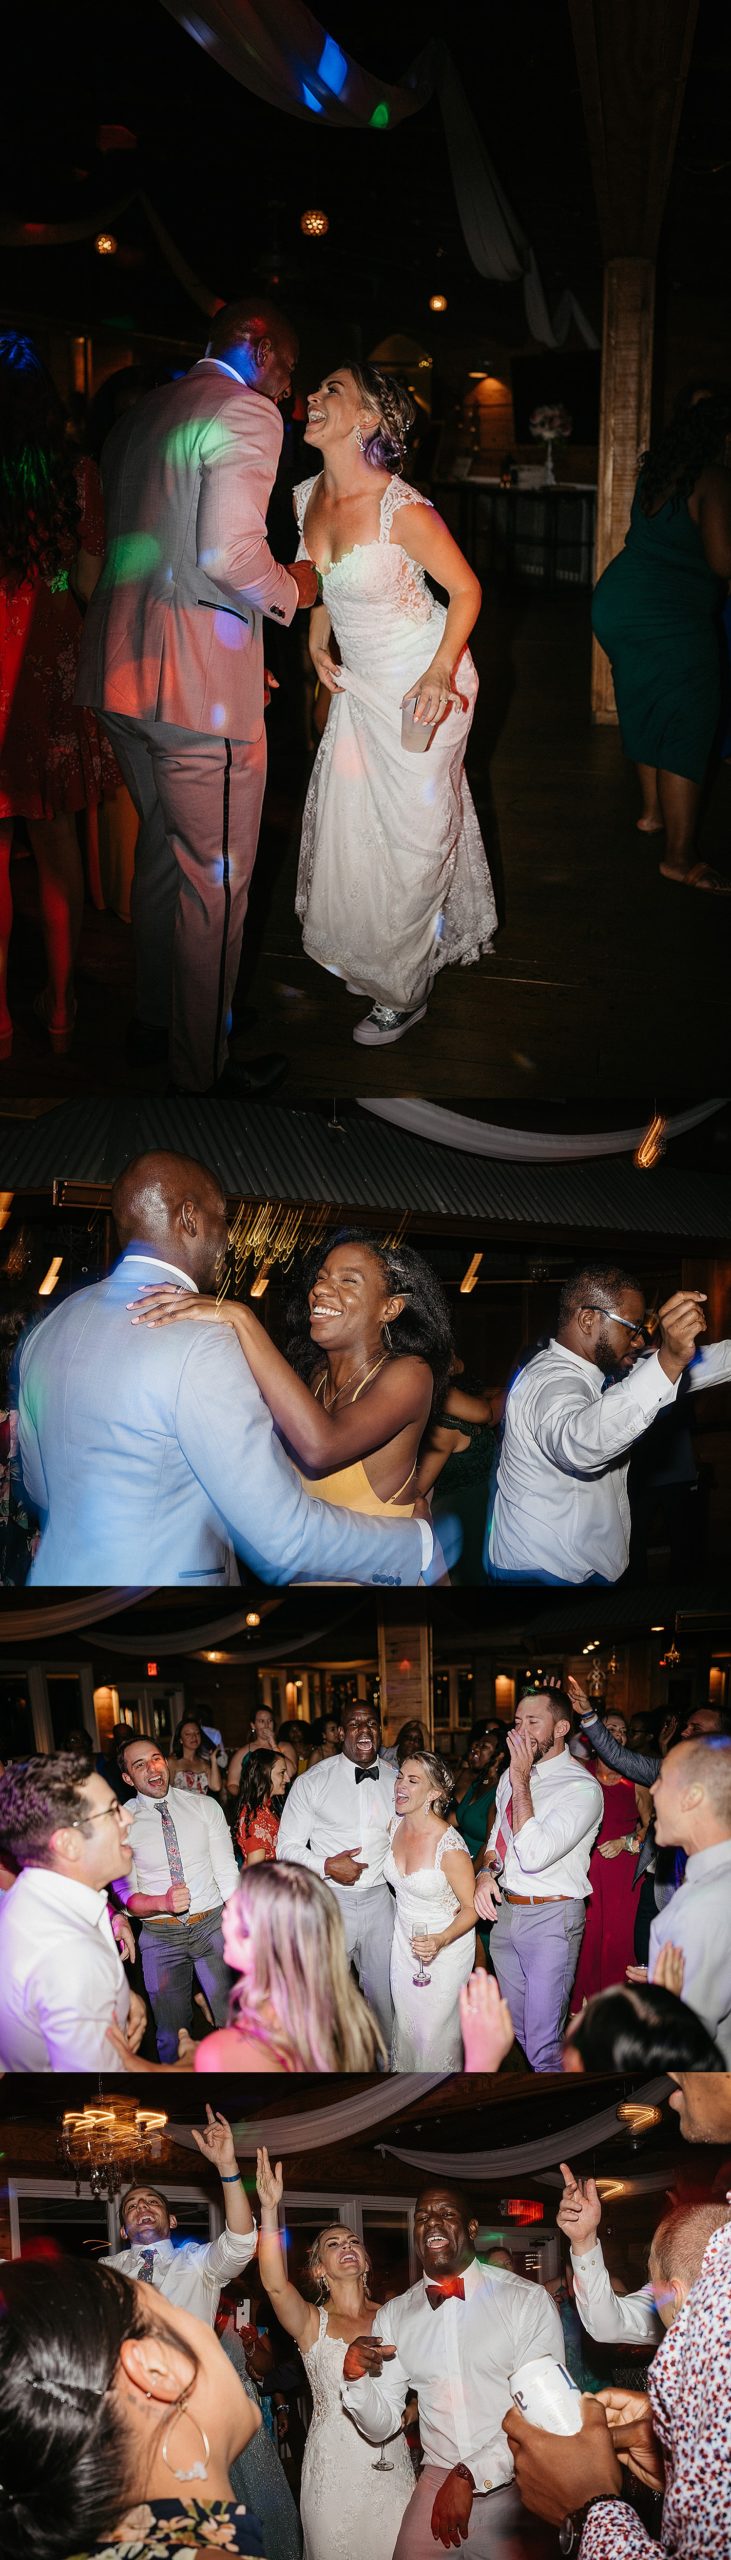 Bride and groom dancing with wedding guests at wedding reception in Destin Florida